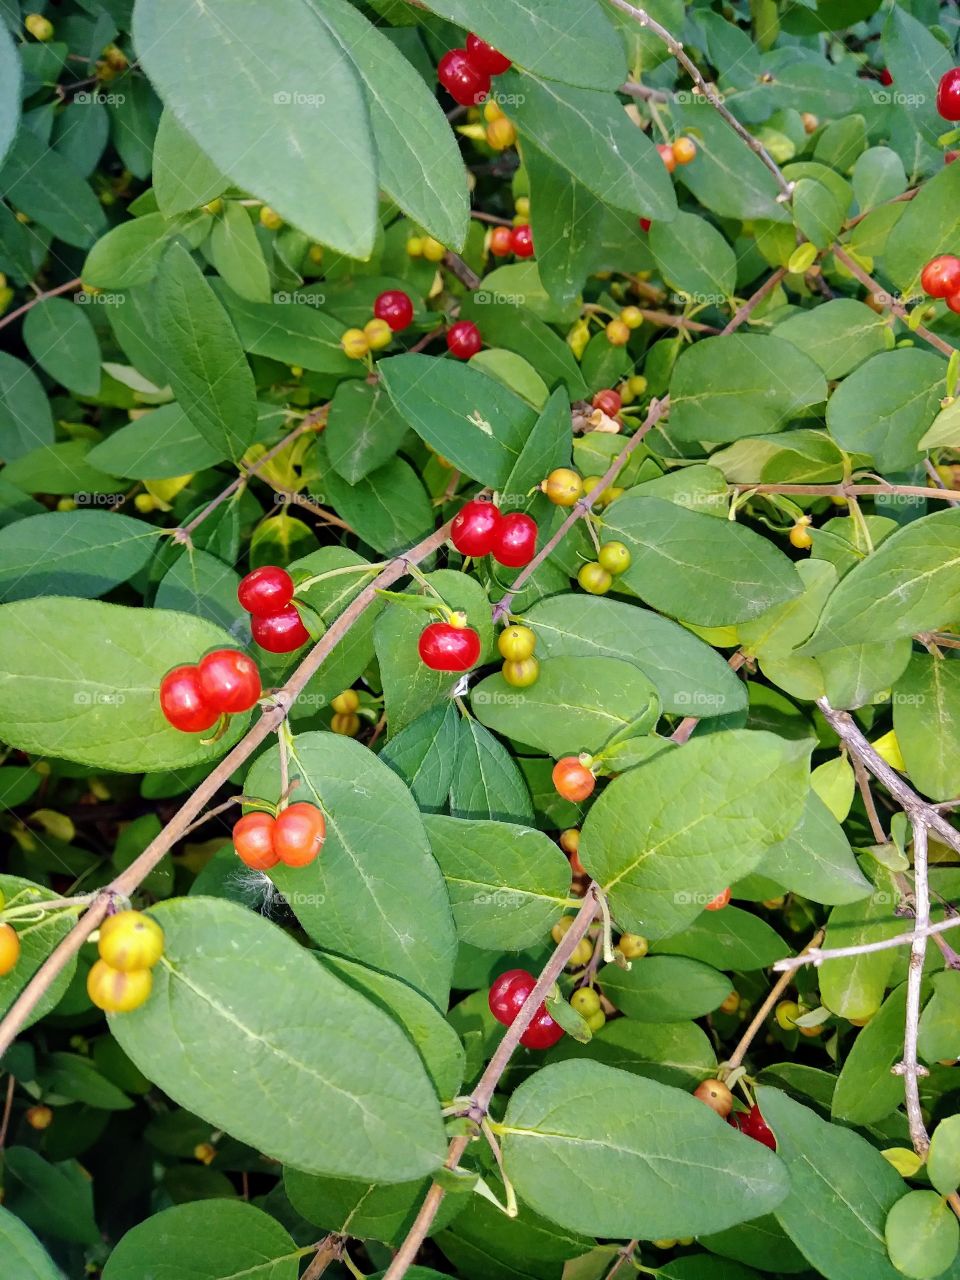 Red and green berries on honeysuckle bush.